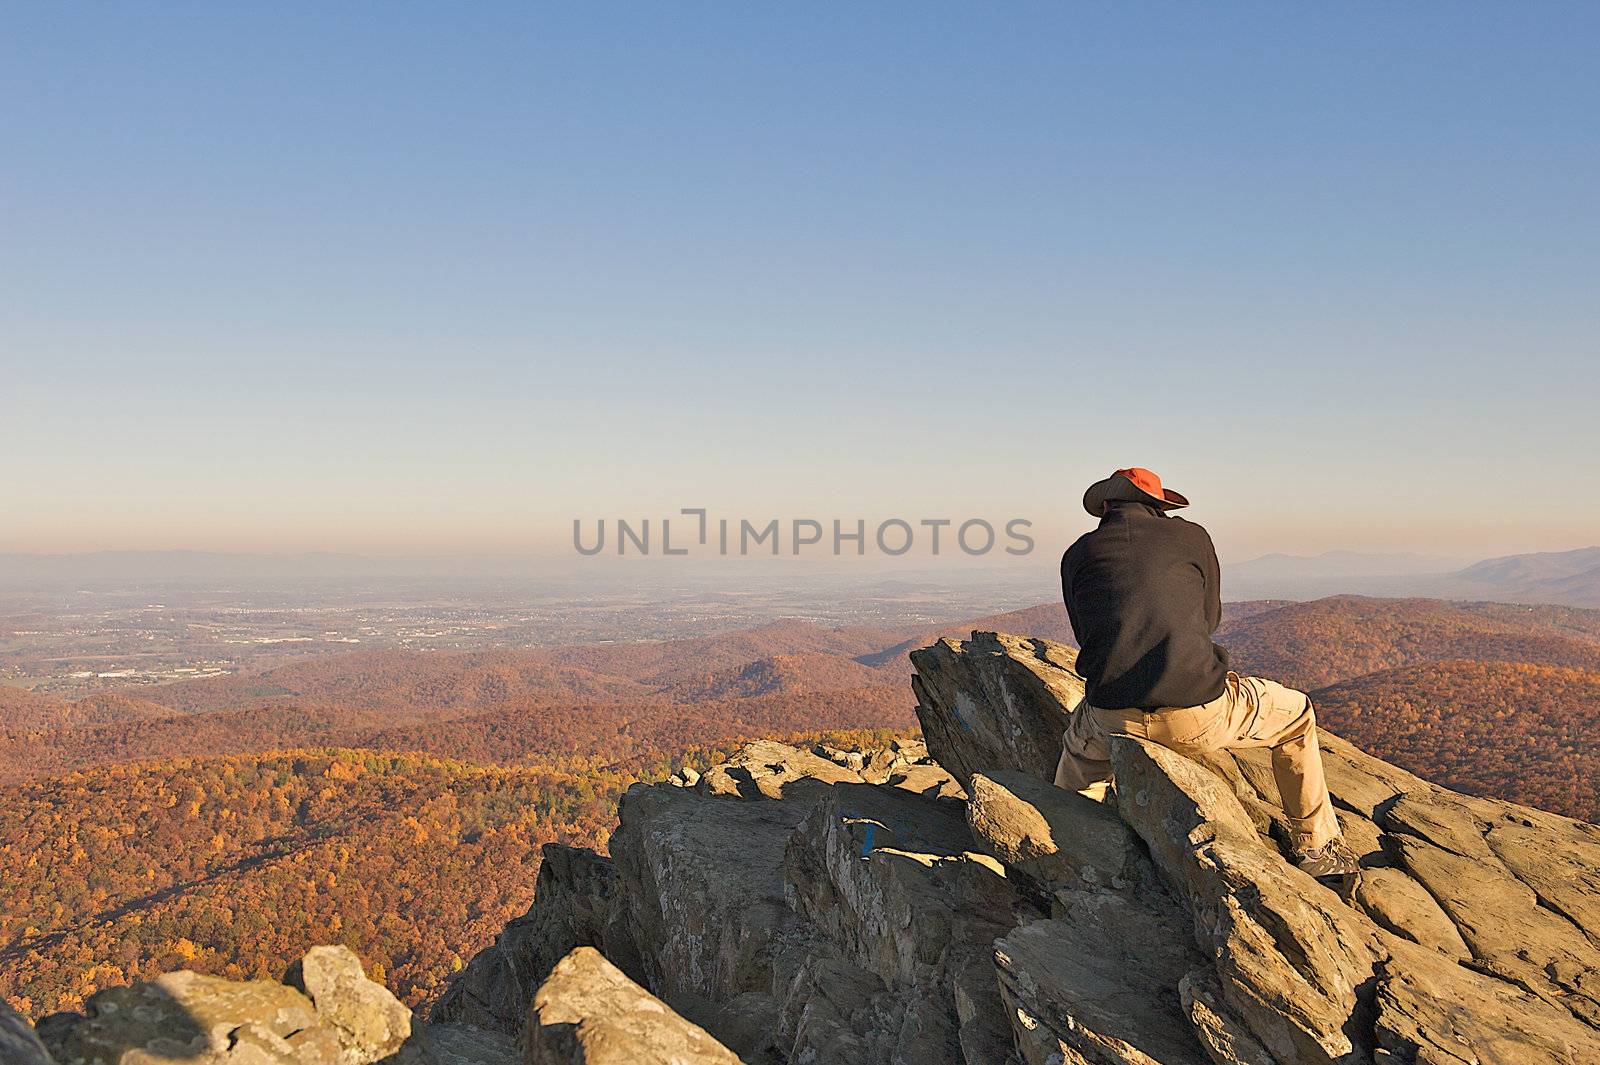 Man reflecting life while sitting on Humpback Rock in the Blue Ridge Mountains of Virgina.  The hike to this scenic overlook is about 1 mile straight up, an acheivement for any hiker.  Room for text at the top of the image.